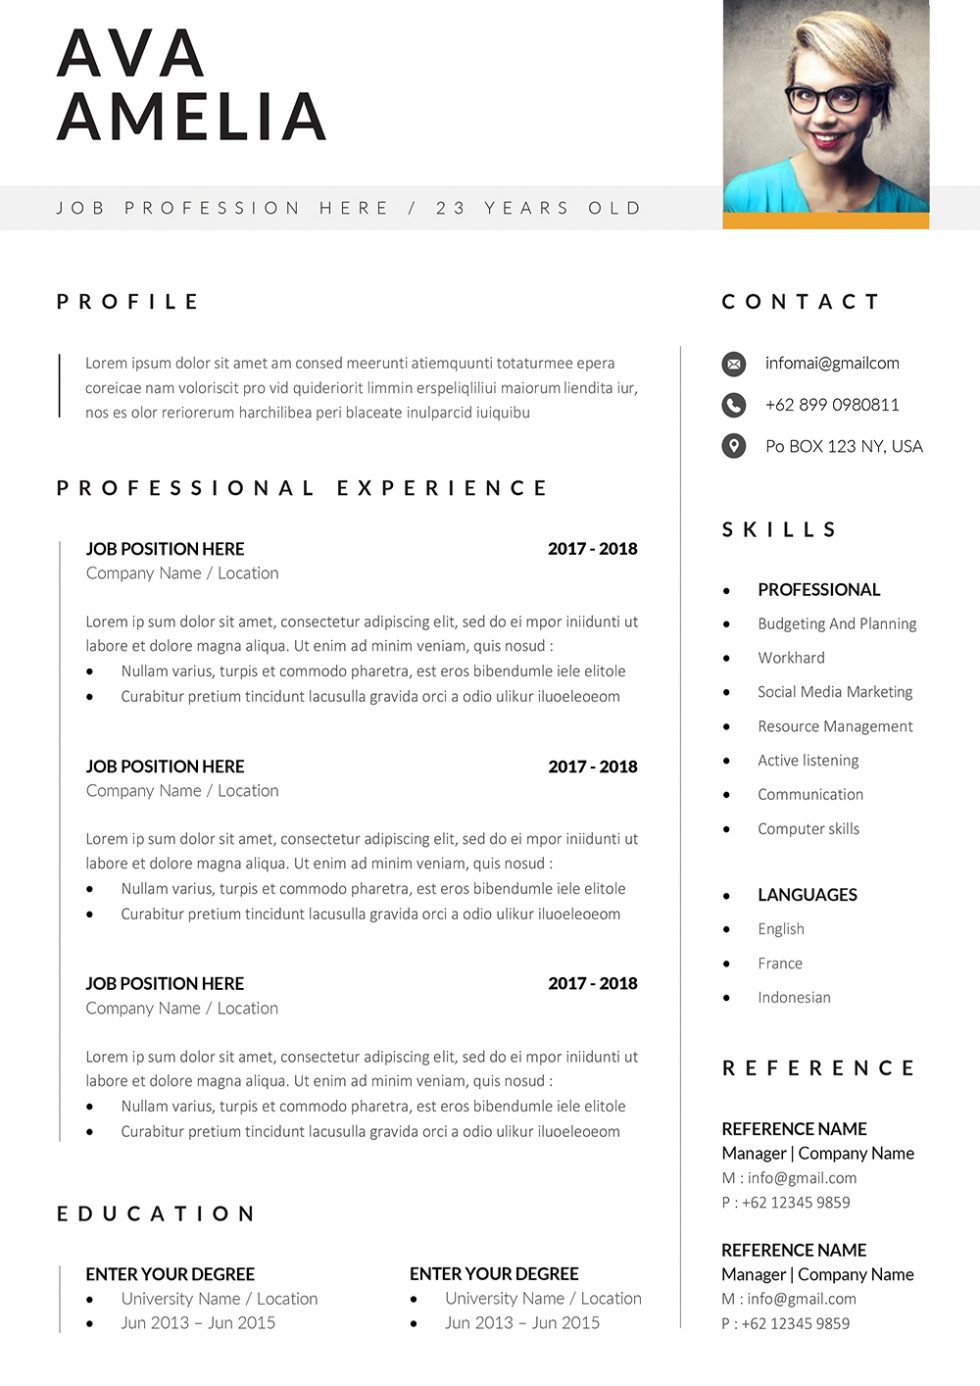 ATS Friendly Resume Template Word Format DOC DOCX 